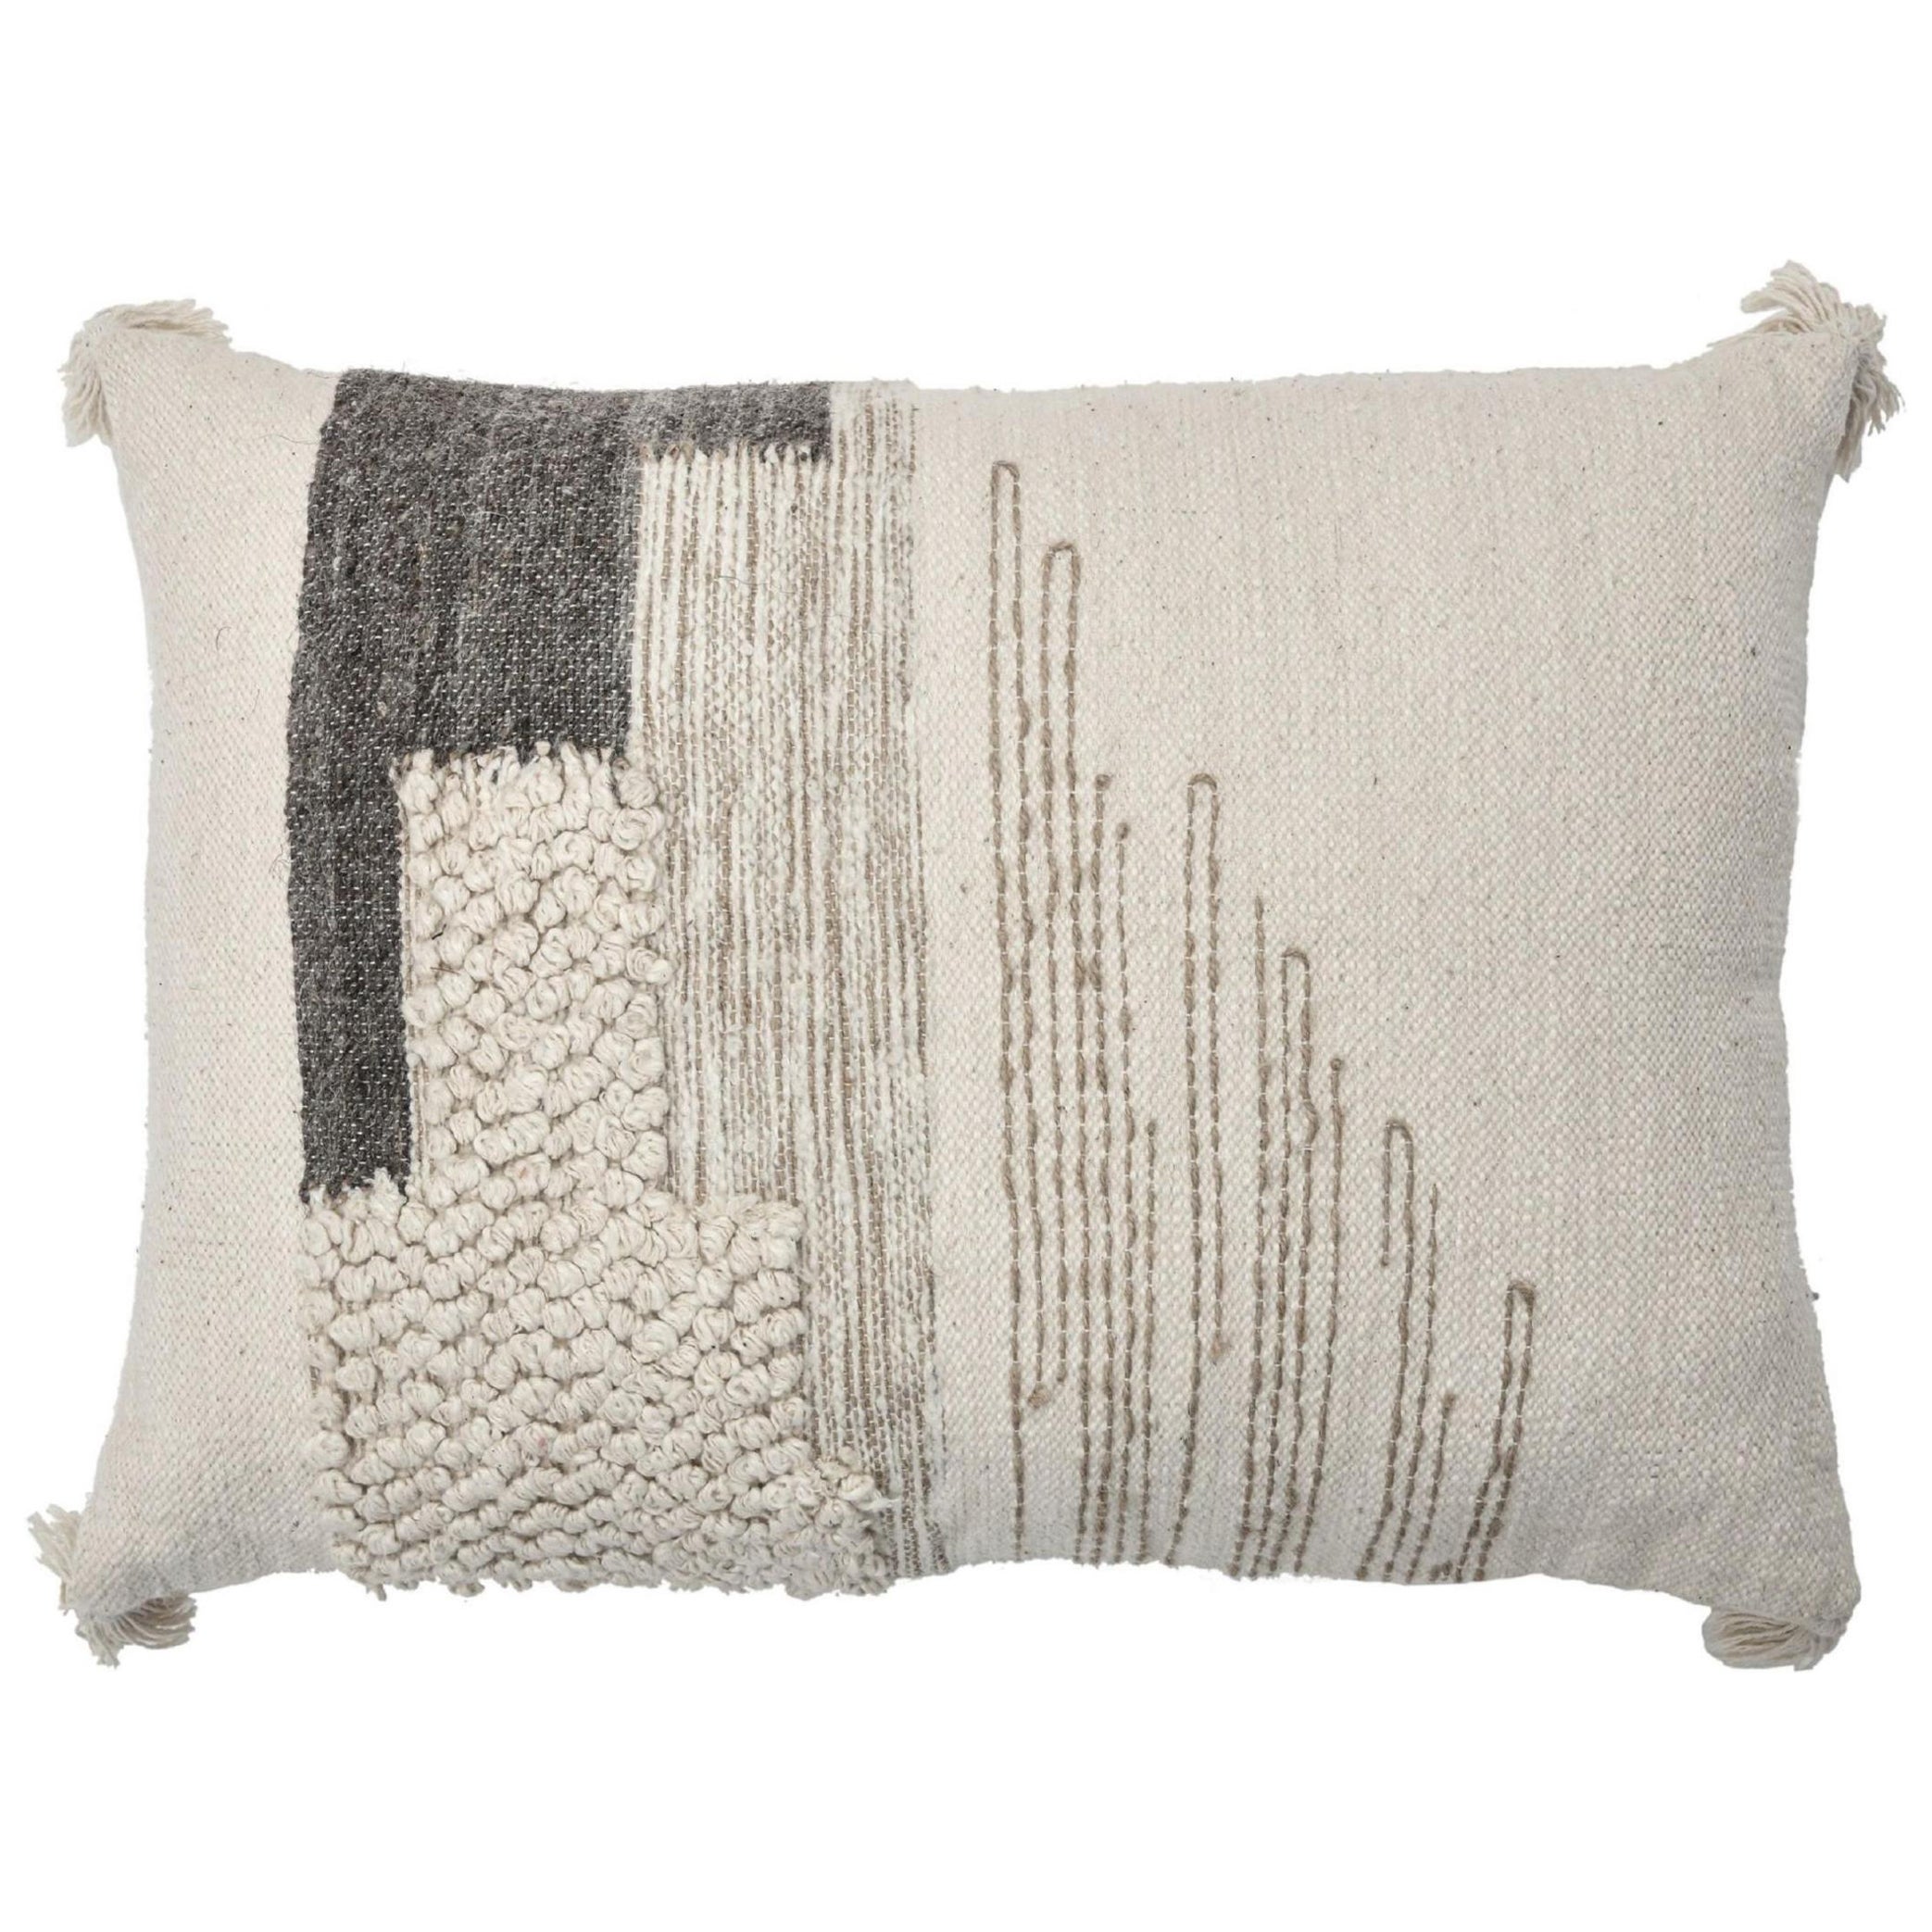 Contemporary Boho Chic Style Wool and Cotton Pillow In Beige